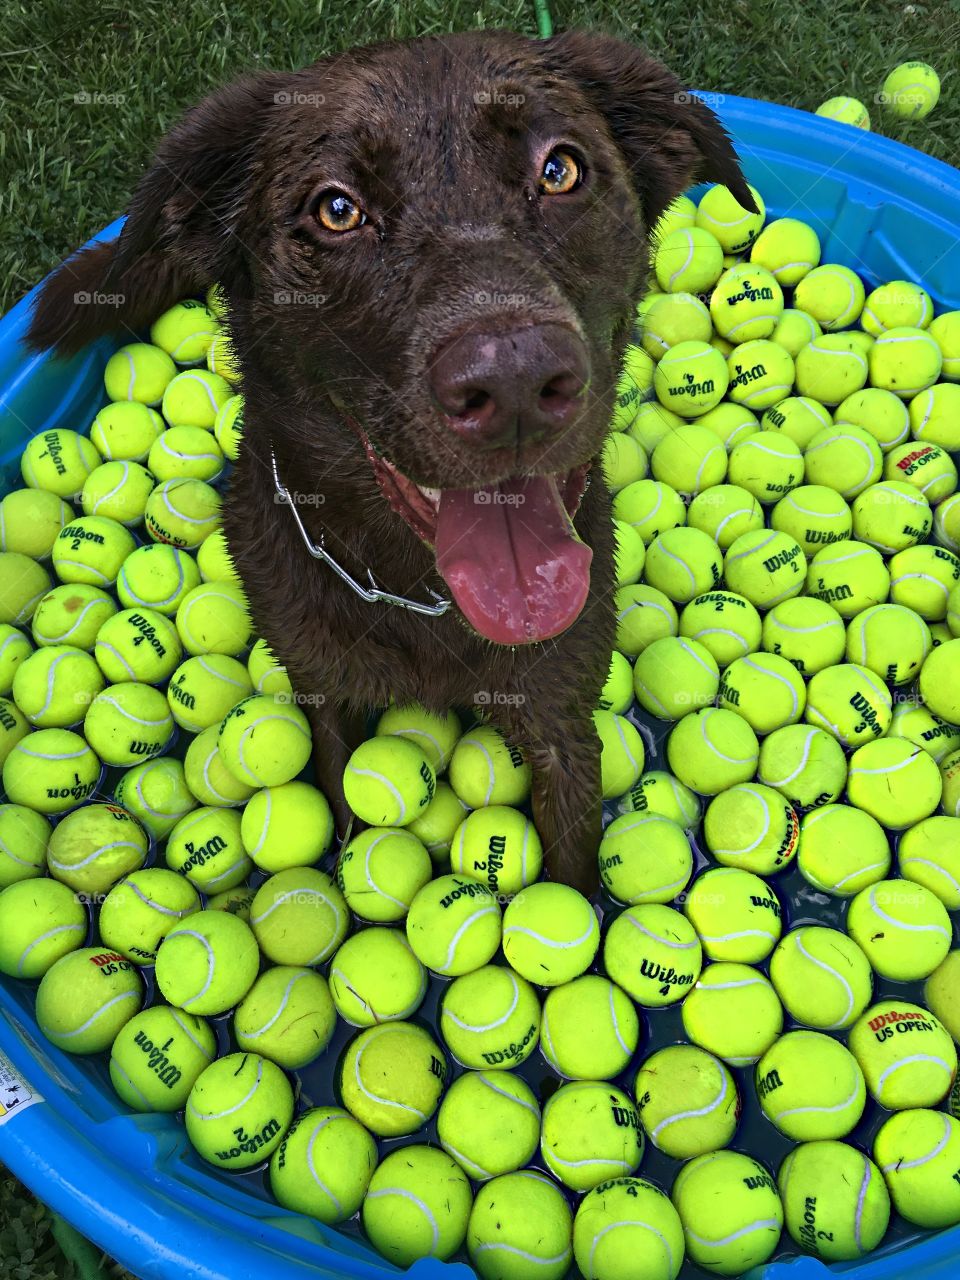 Axels birthday present, 100 tennis balls and a pool.